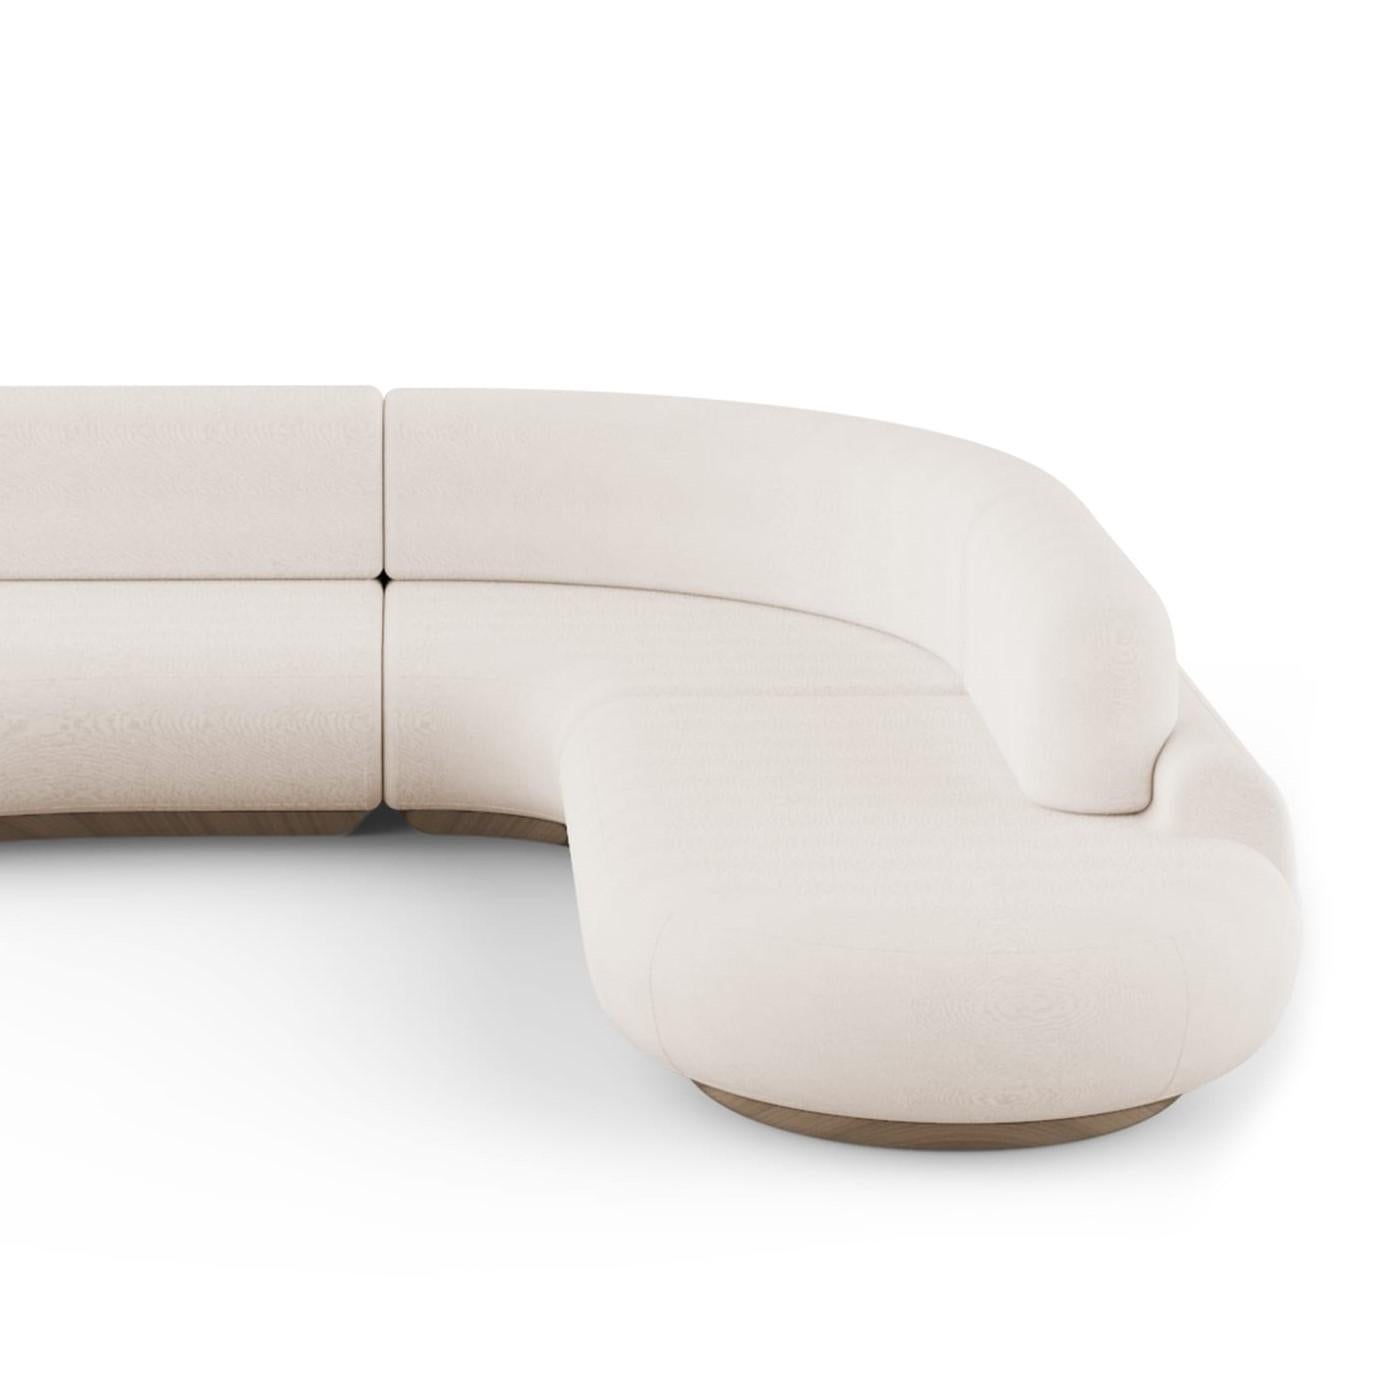 Portuguese Naked Sofa by DOOQ For Sale